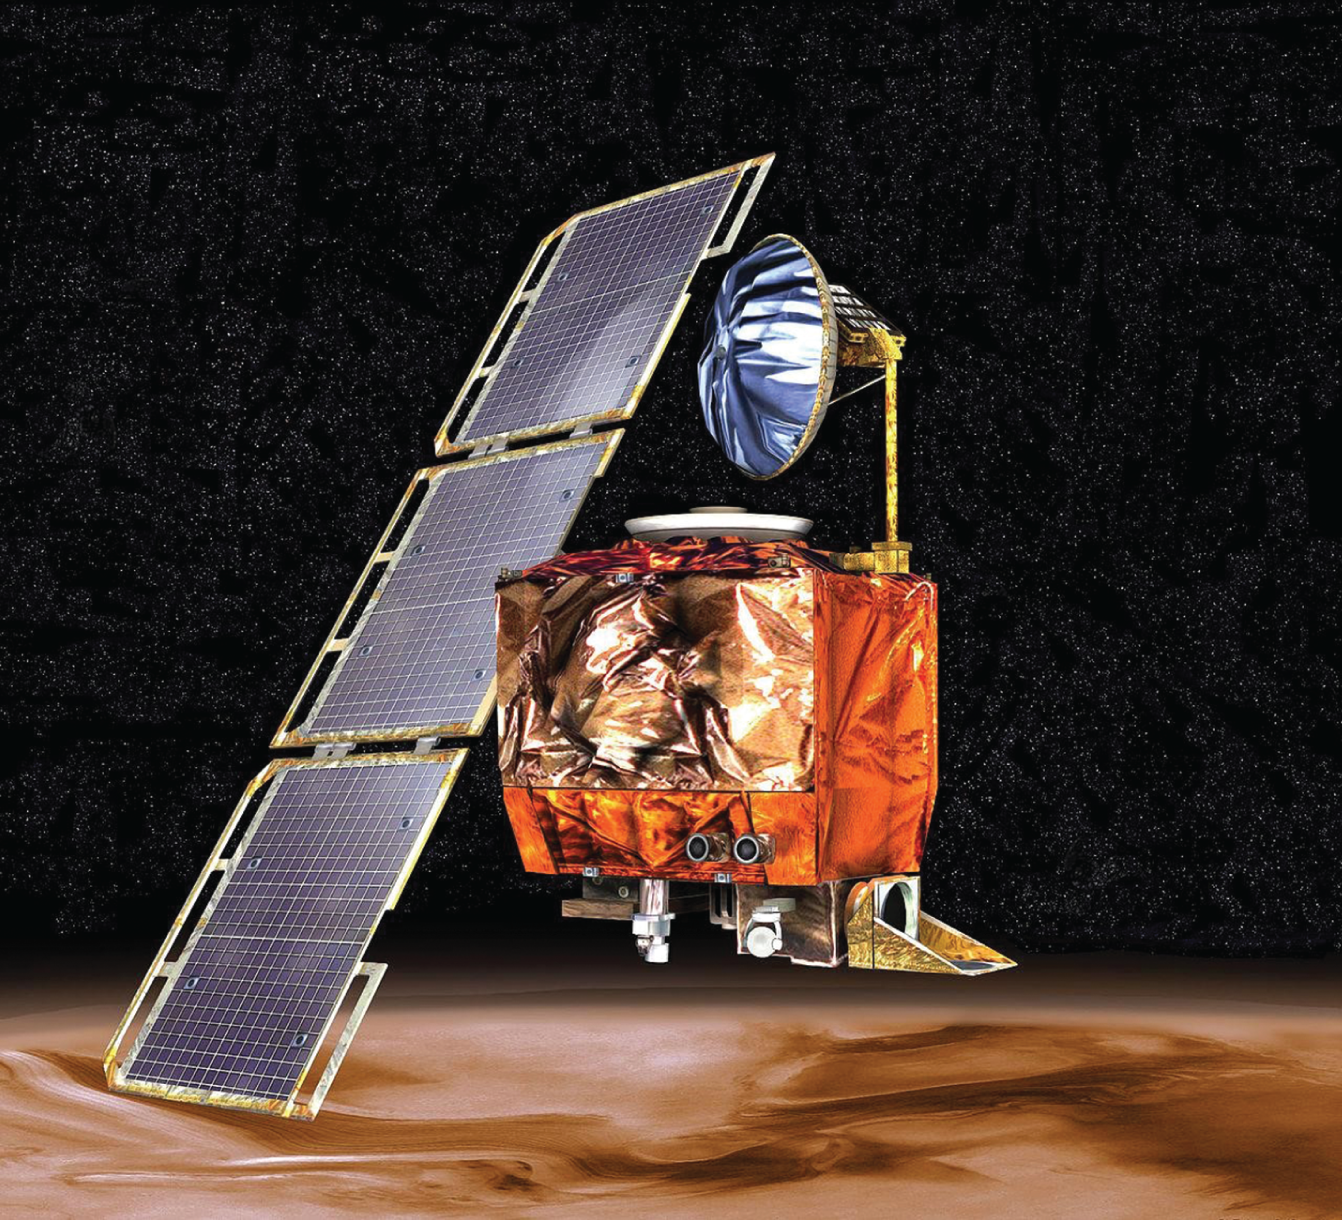 Image of an artist's rendering of the Mars Climate Orbiter.